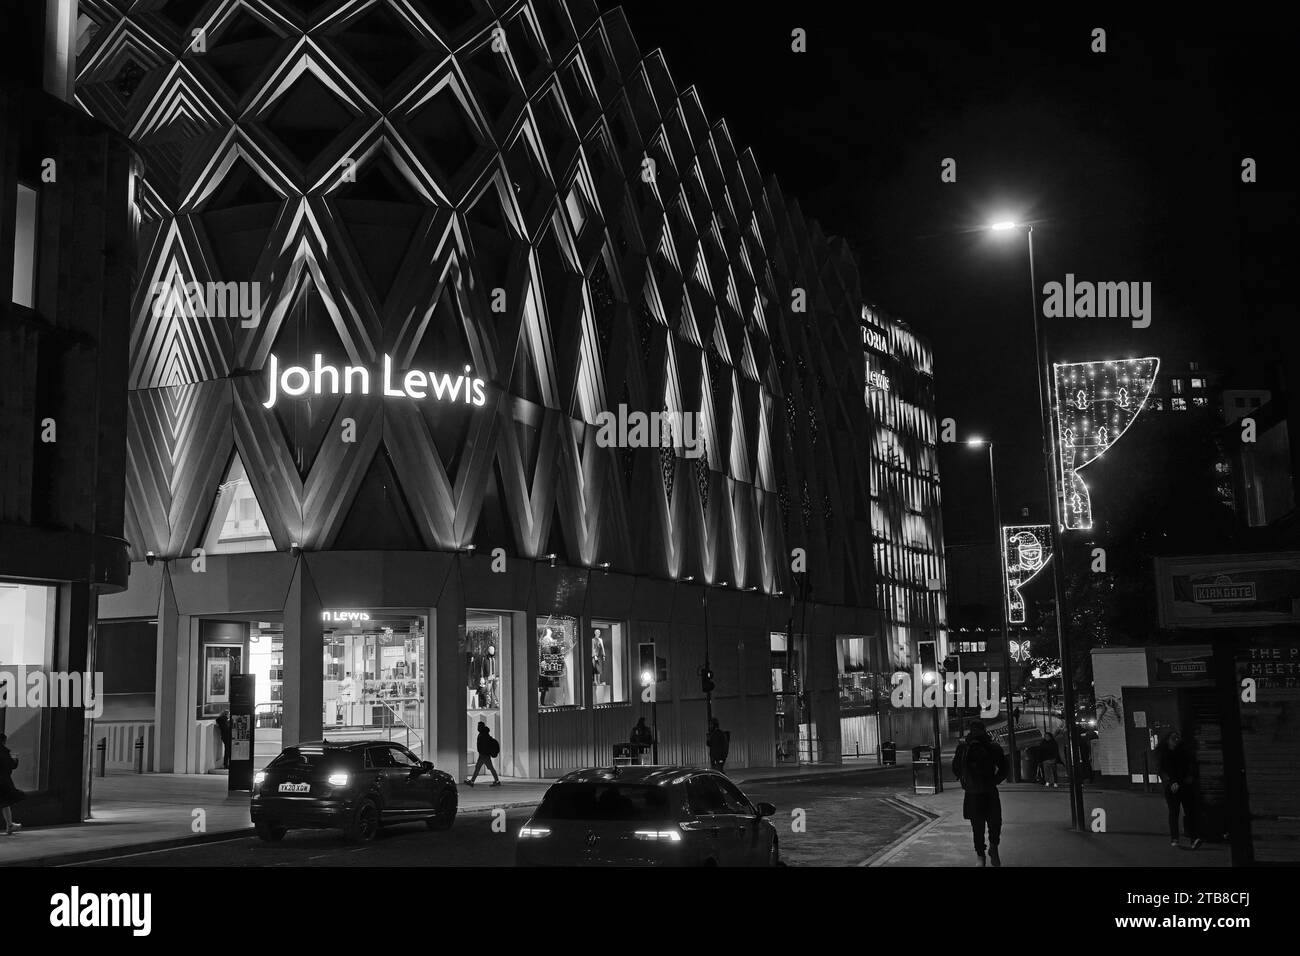 John Lewis department store at night,architectural details stand out in monochrome and bright lights,Leeds,England,UK. Stock Photo